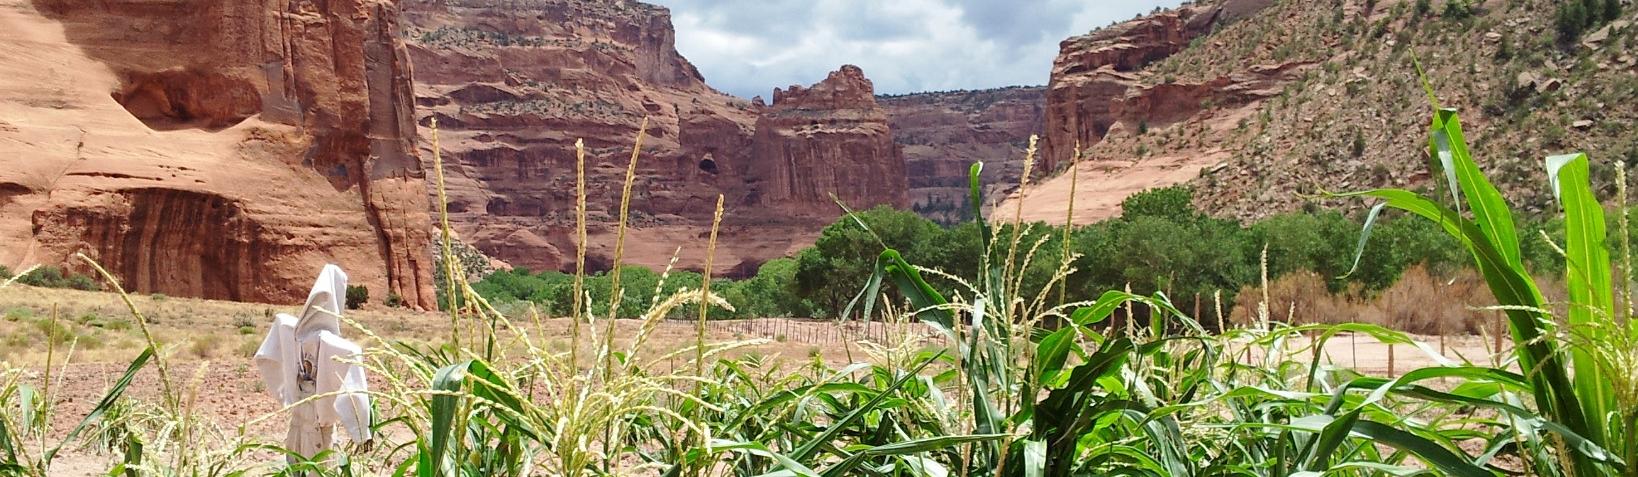 Canyon de Chelly National Monument (U.S. National Park Service)